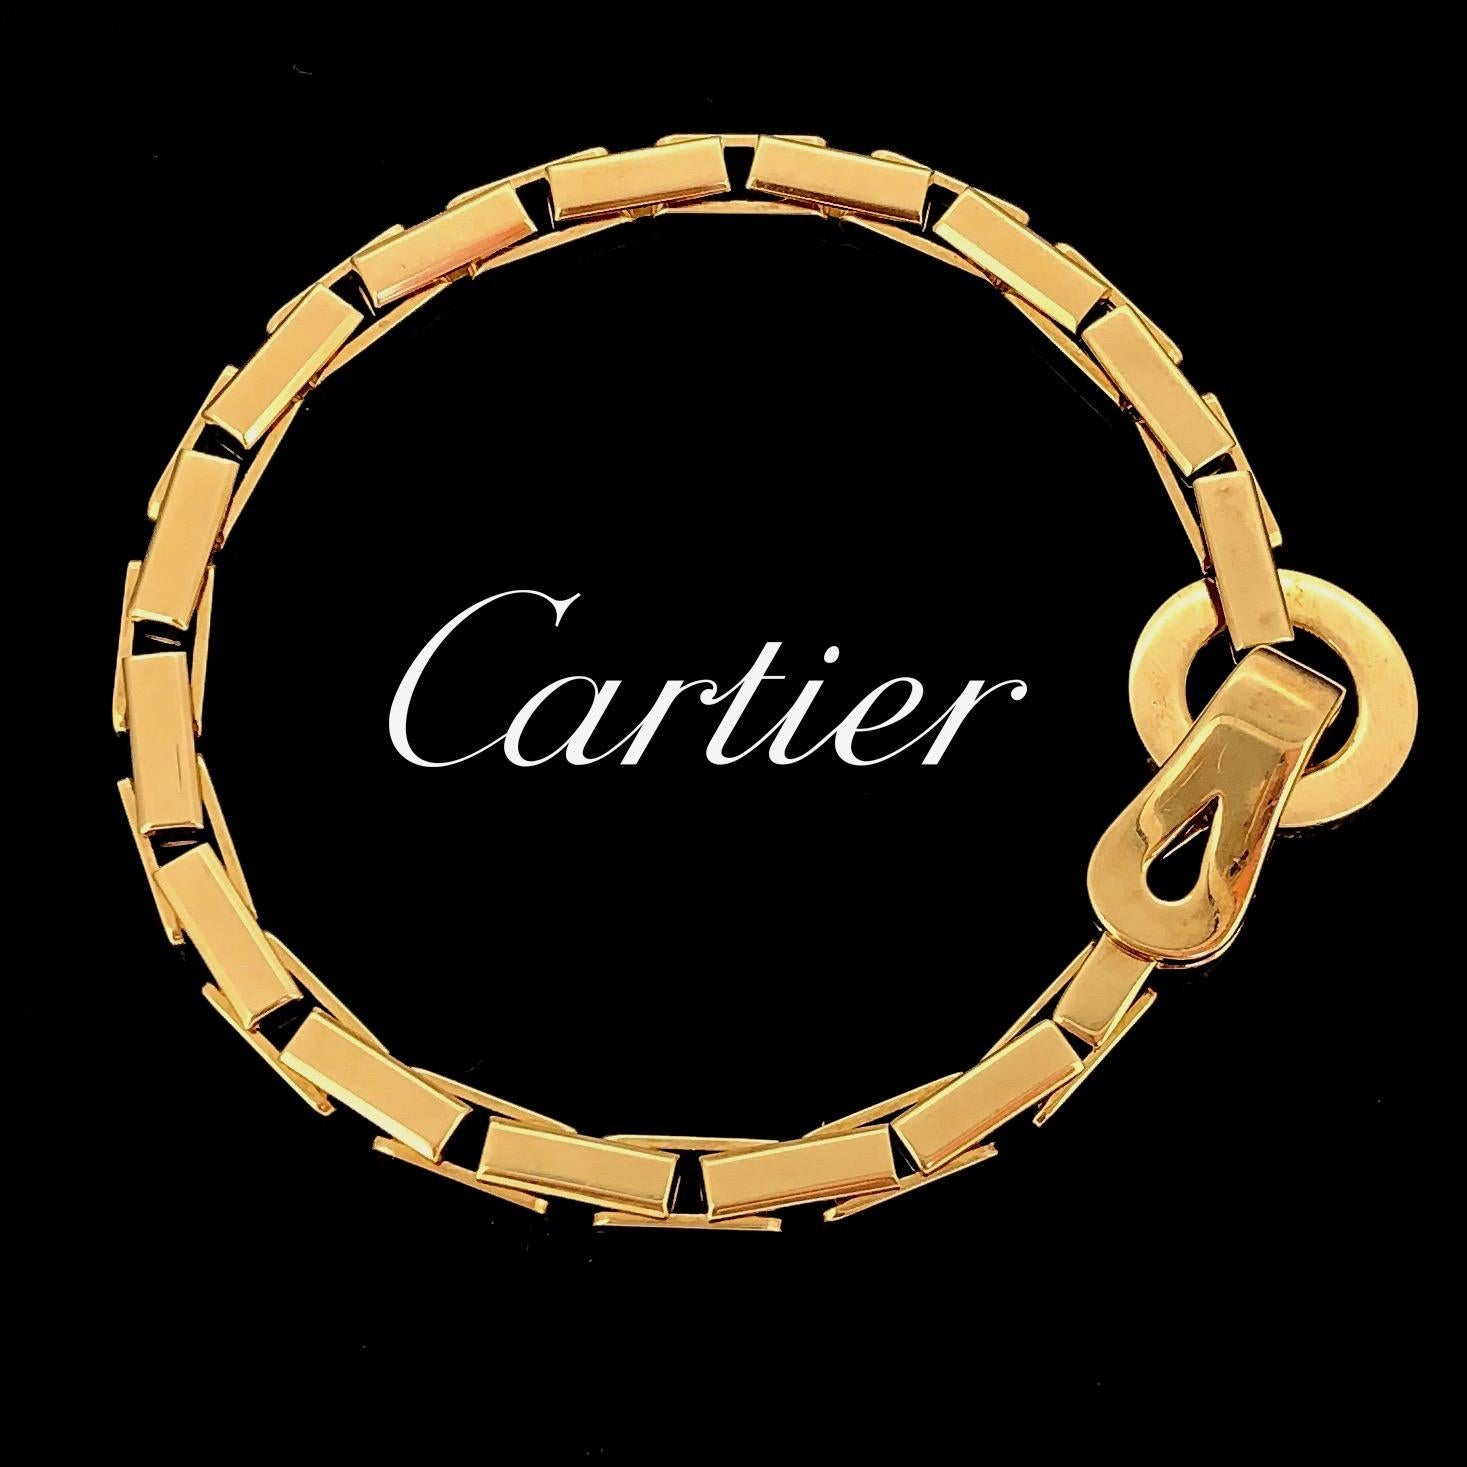 This vintage bracelet is from the Agrafe collection, made by Cartier. The clasp is actually looks like an “Agrafe” as it means in French a hook clasp. The gold is smooth and shiny, very confortable to wear. The clasp is signed Cartier and numbered.